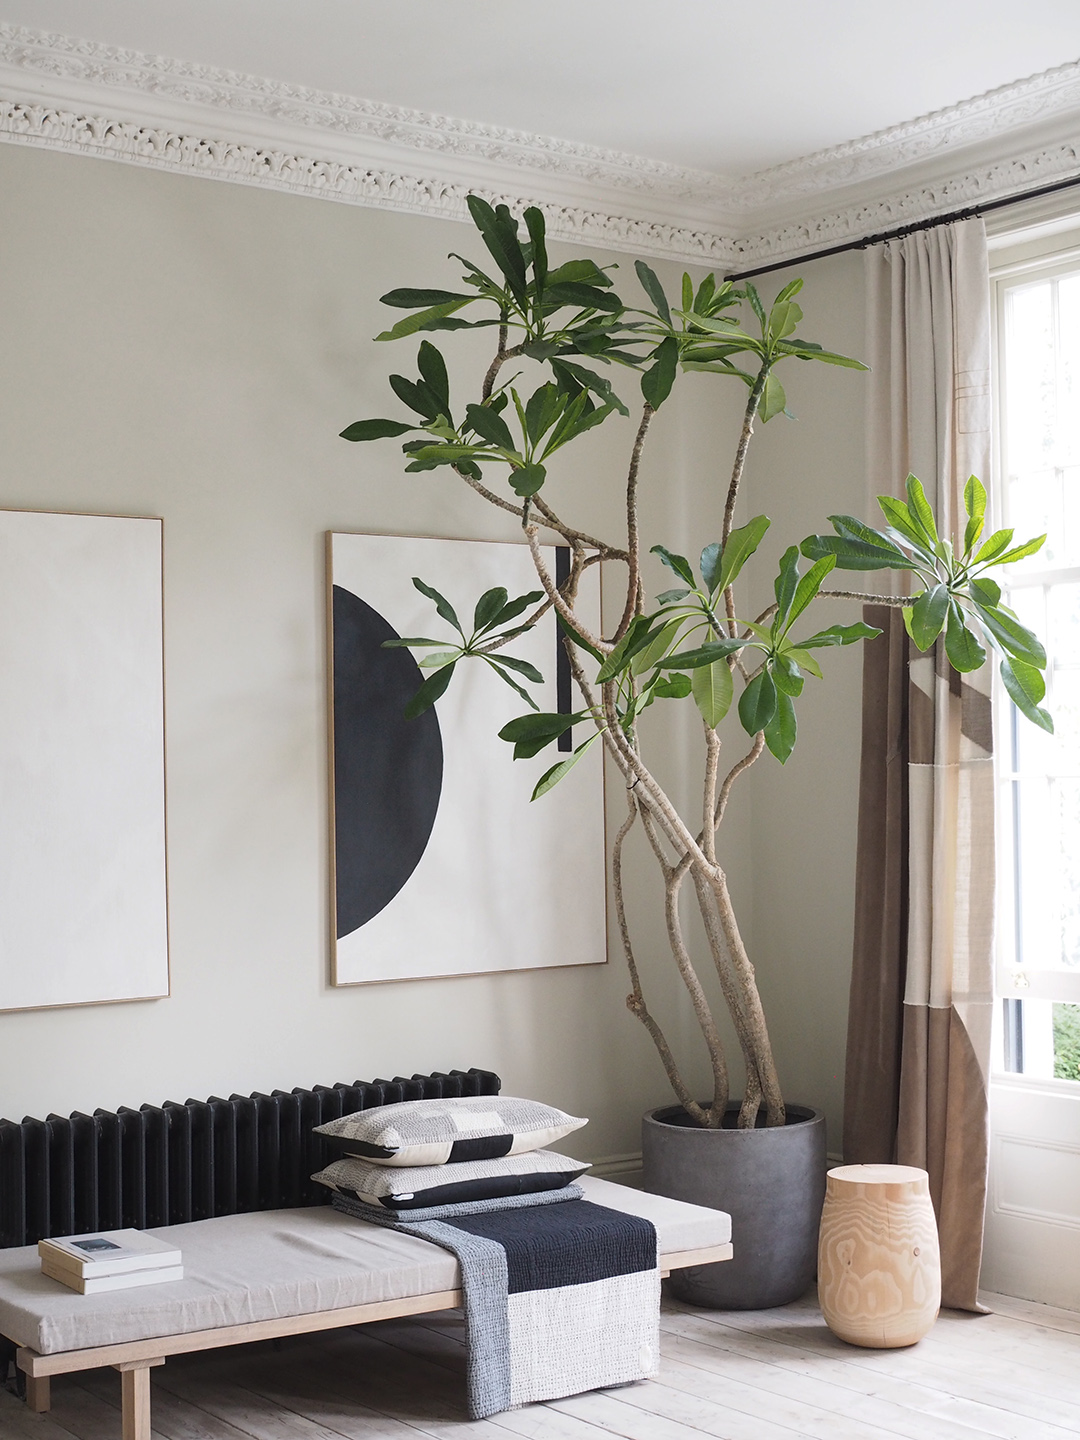 Bring the Outdoors In with Plants